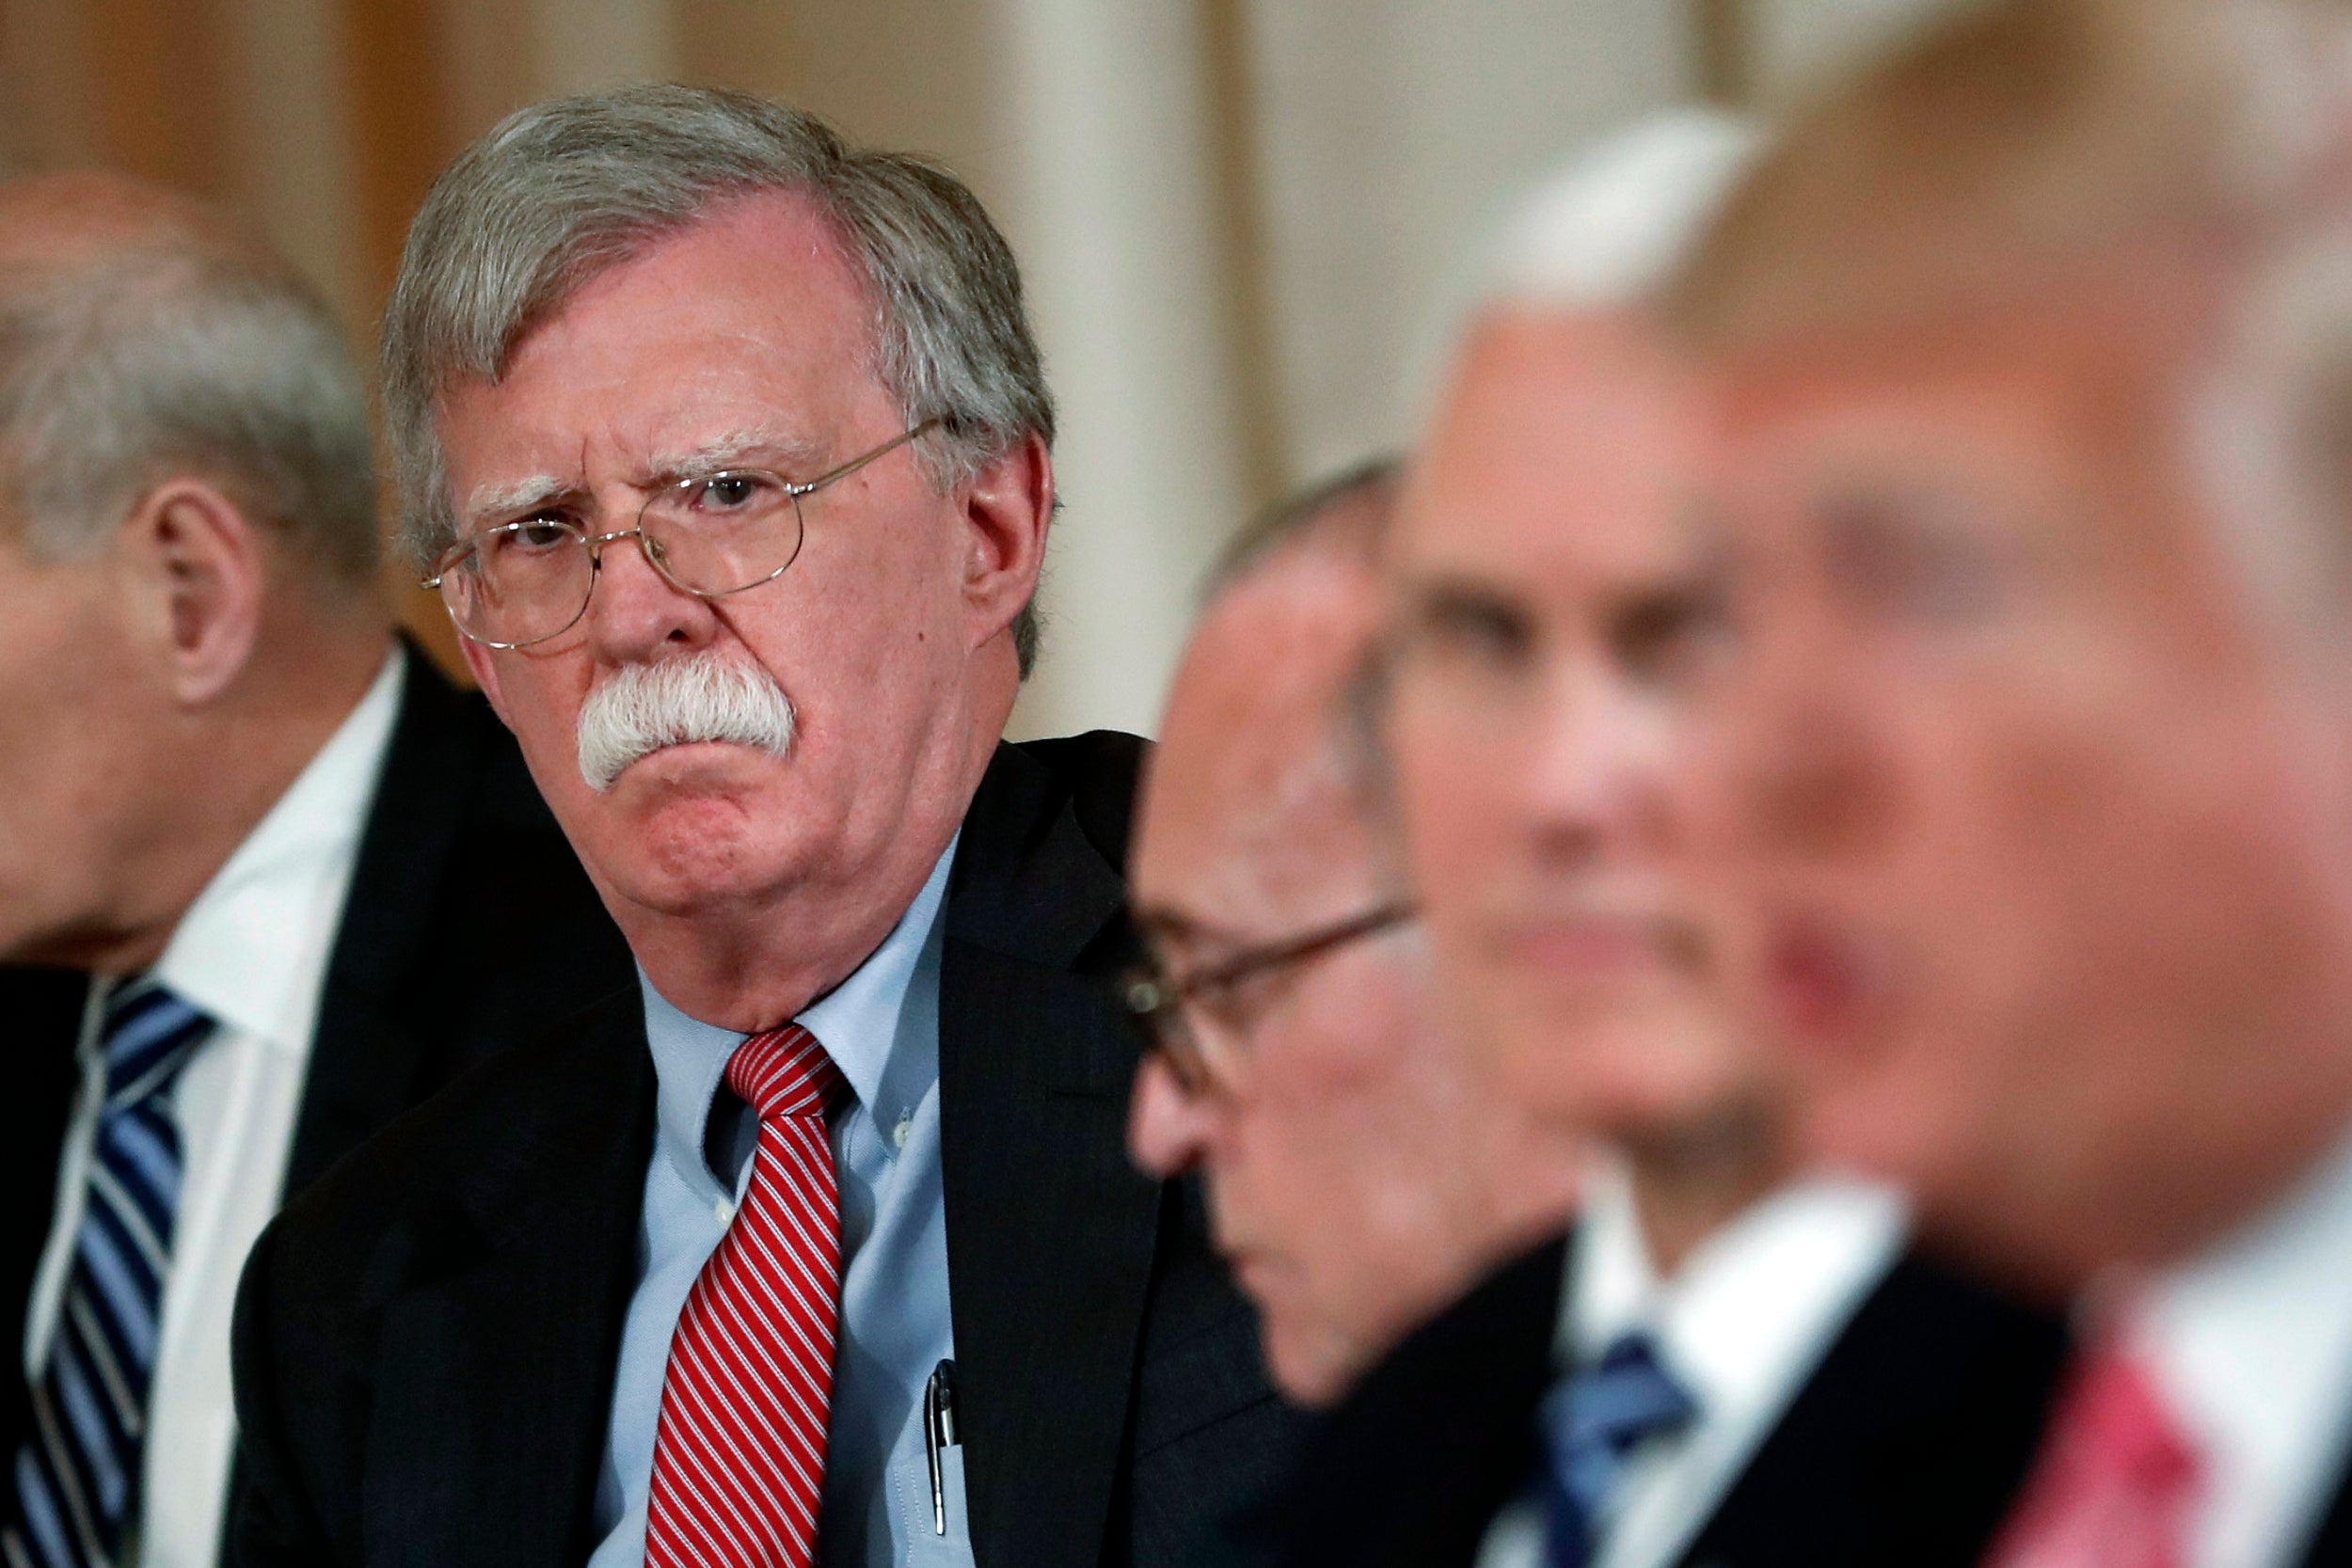 Please don't ruin the day John Bolton got fired by trying to convince me his 'dissenting voice' was necessary in the White House